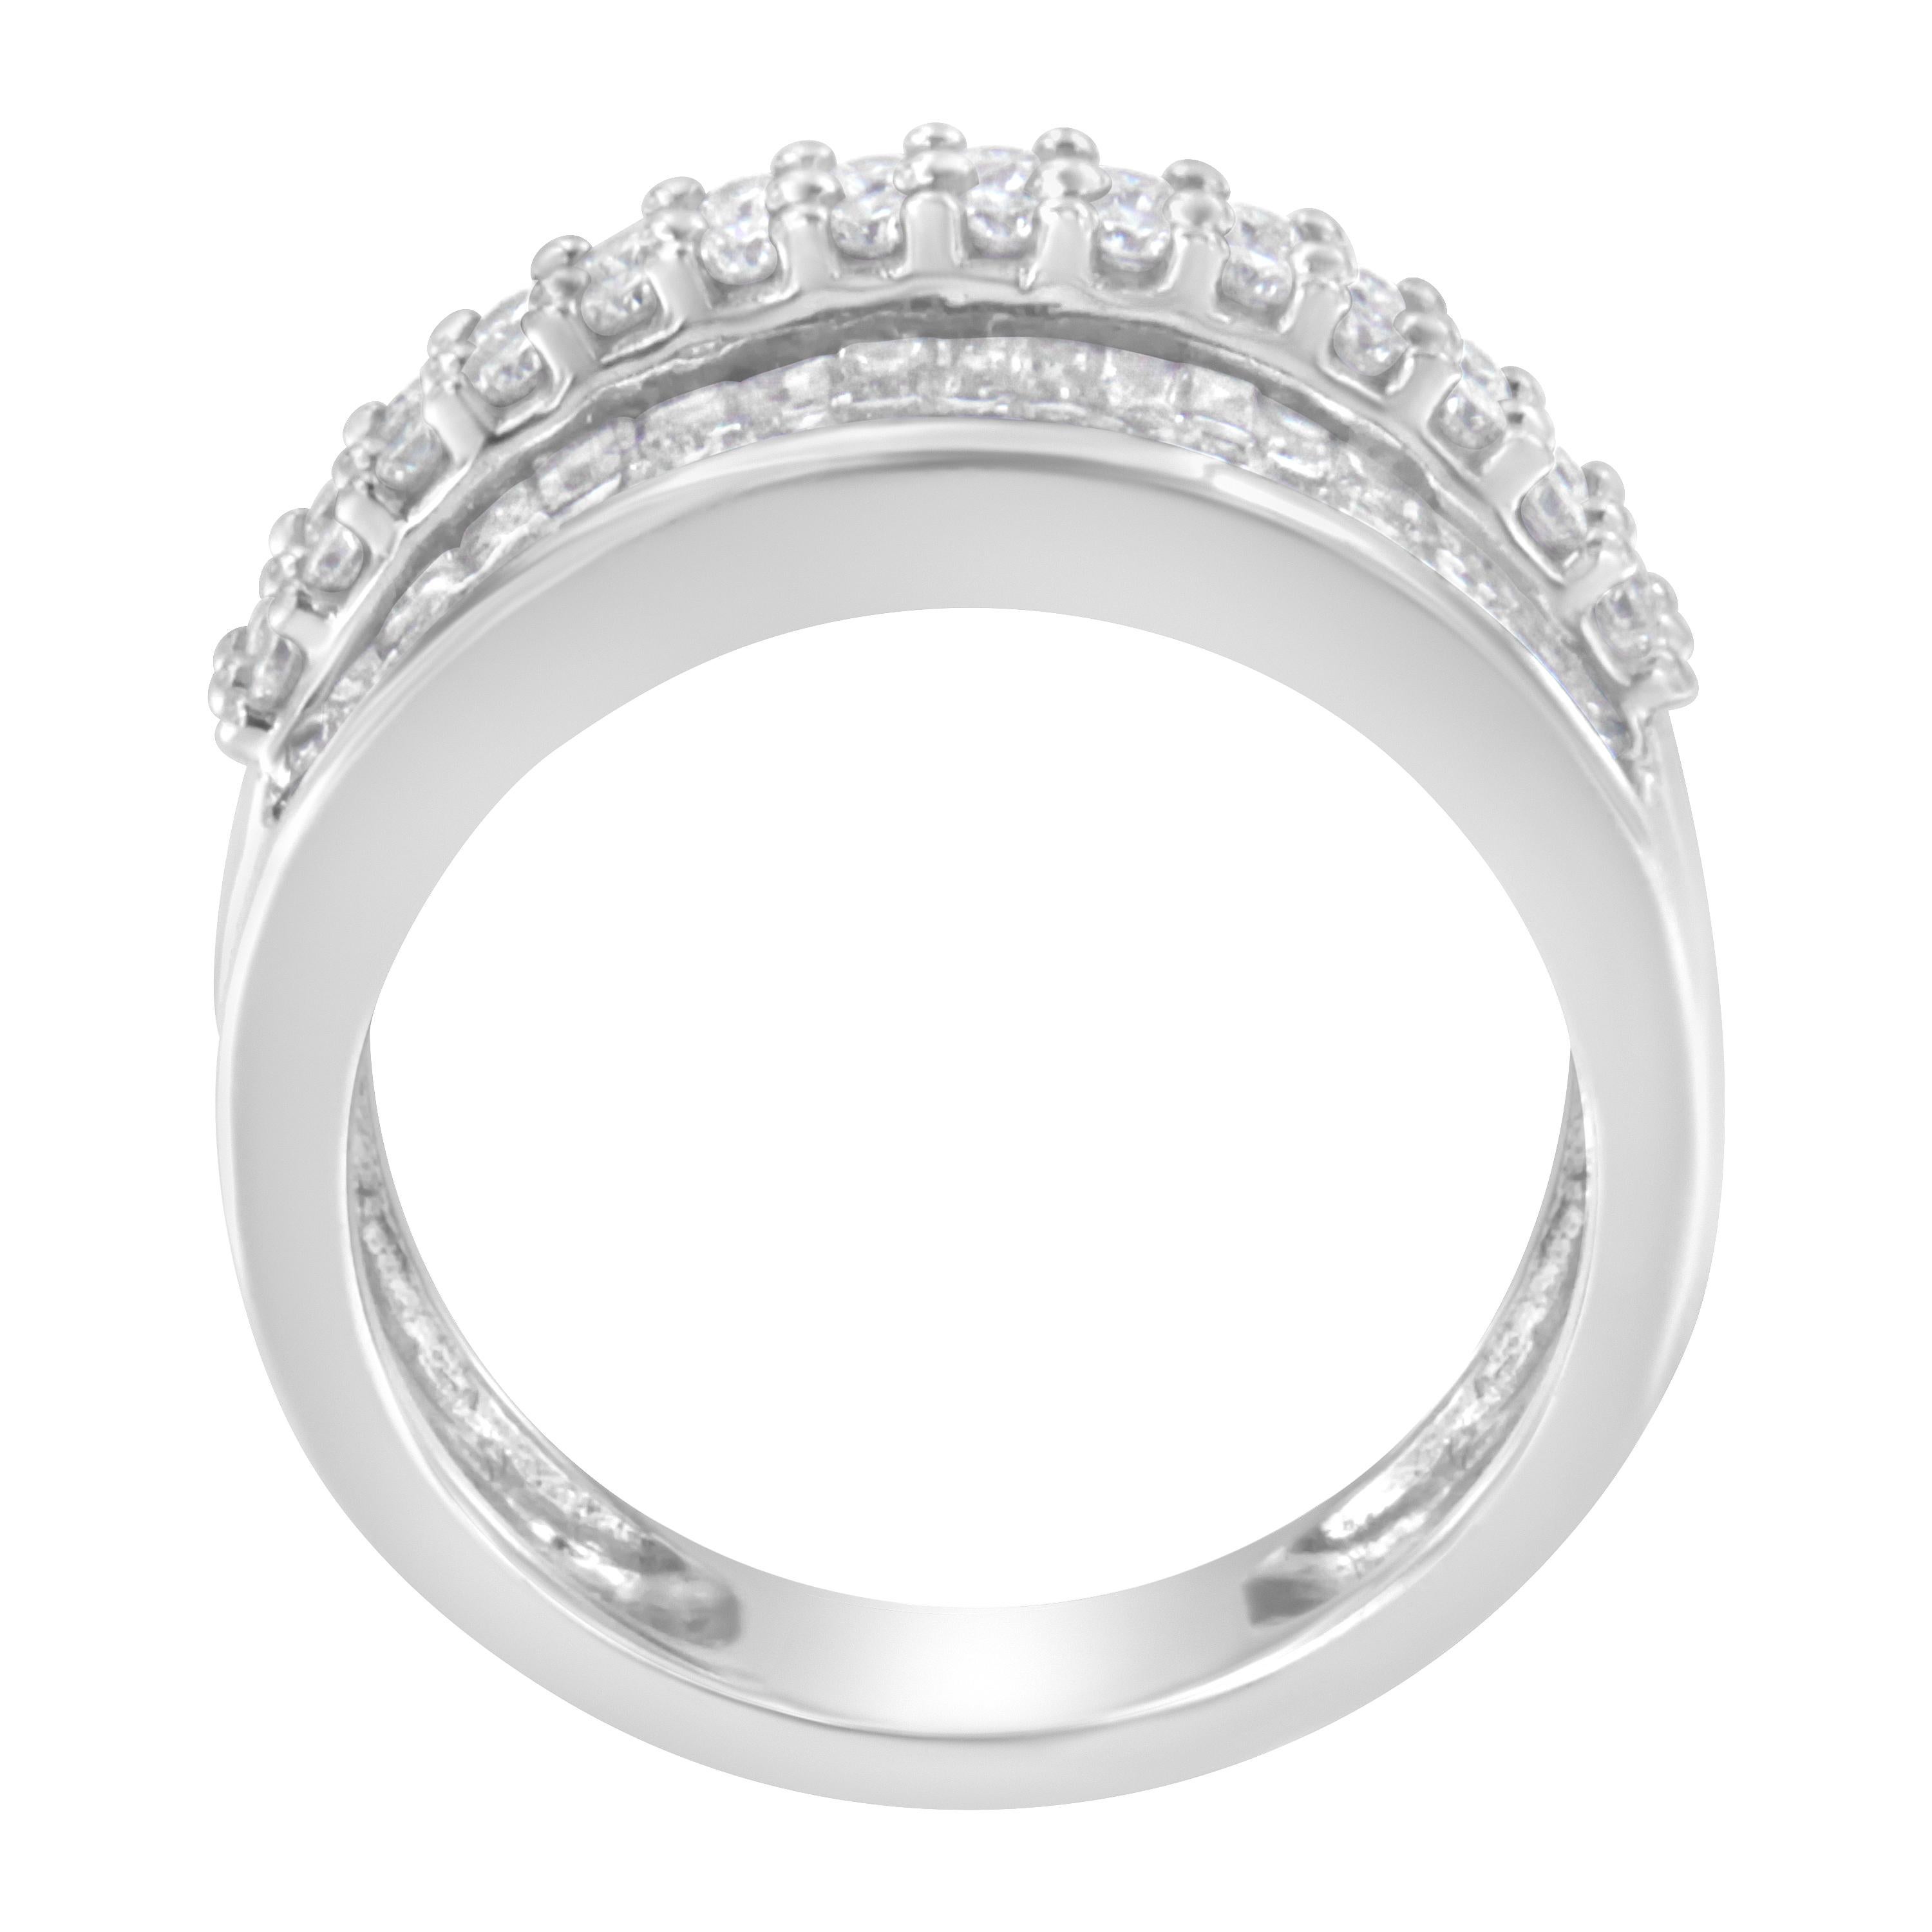 For Sale:  14K White Gold 1 1/2 Carat Round and Baguette Diamond Ring 3